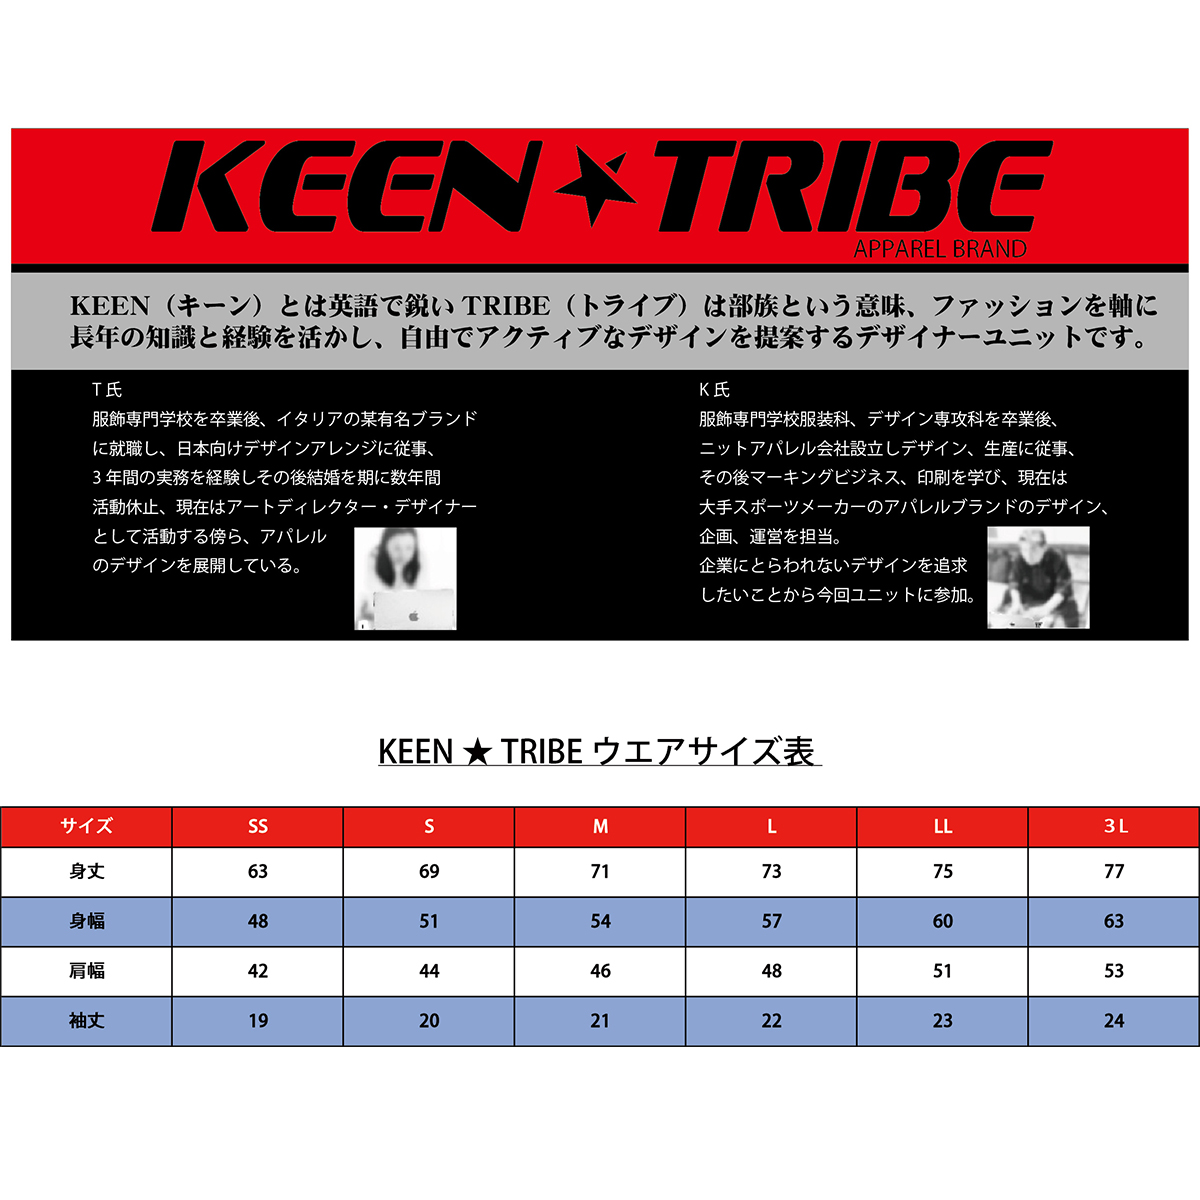 KEEN ★ TRIBE　KT-50(受注生産)